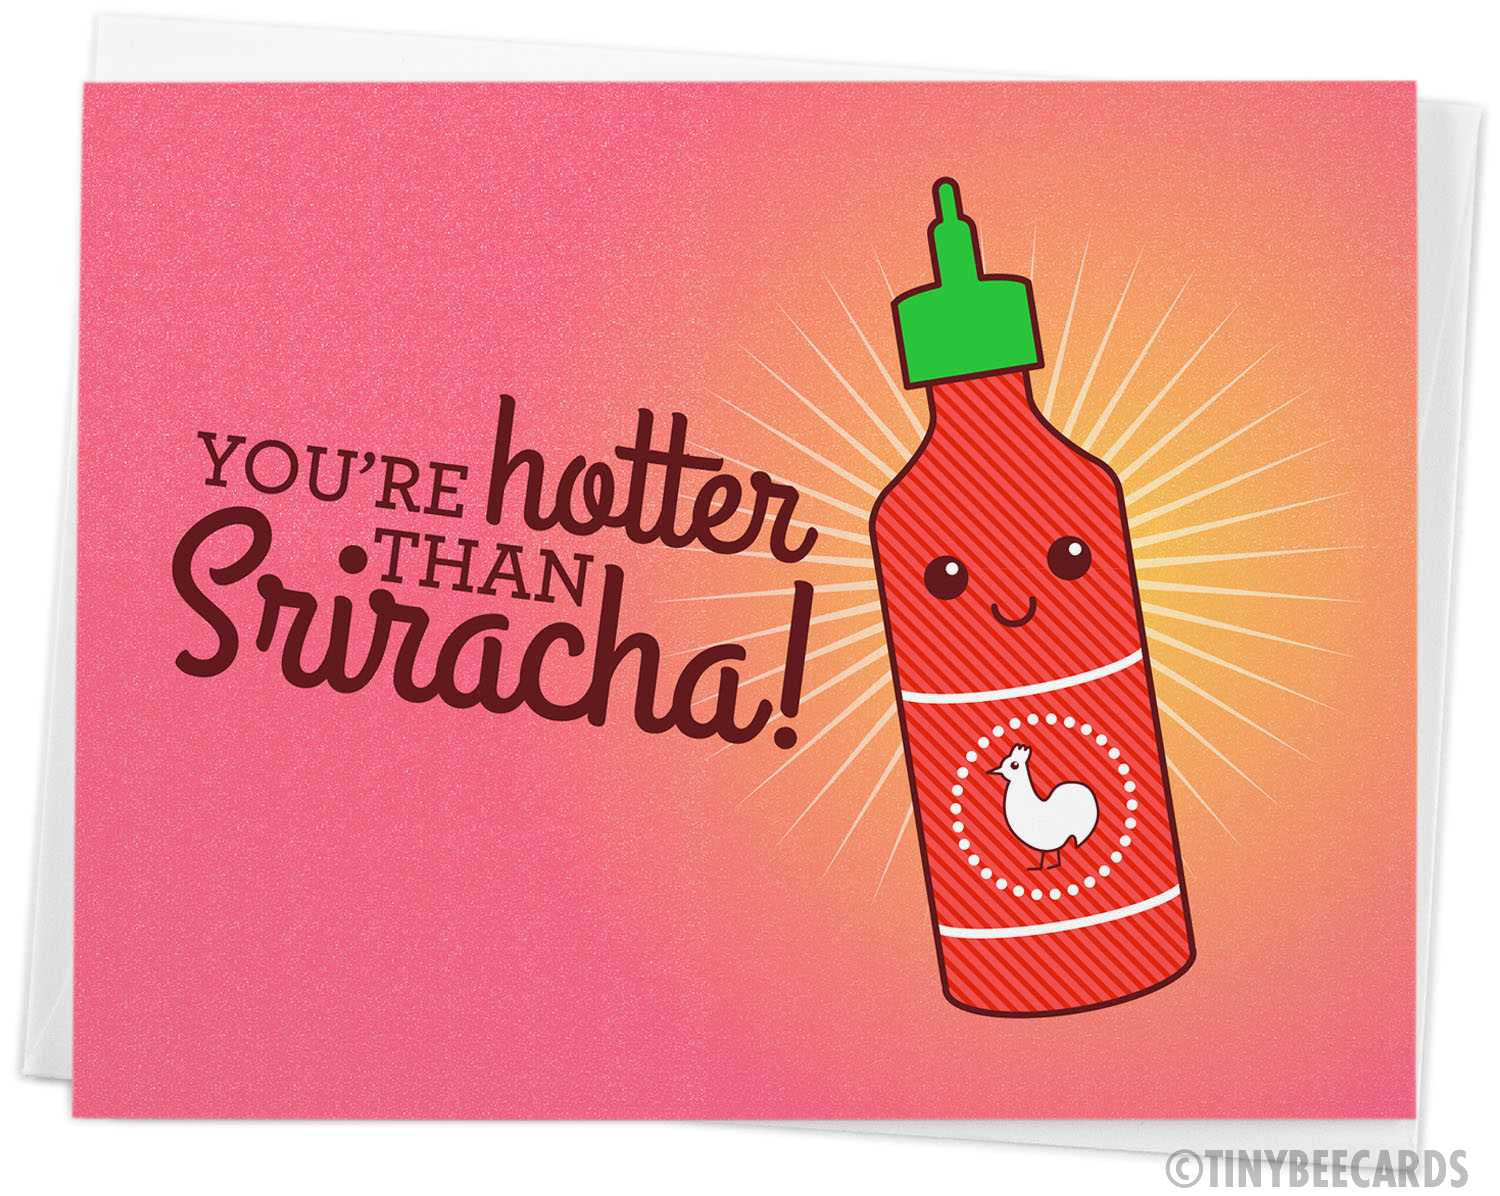 Funny love card "you're hotter than Sriracha!"